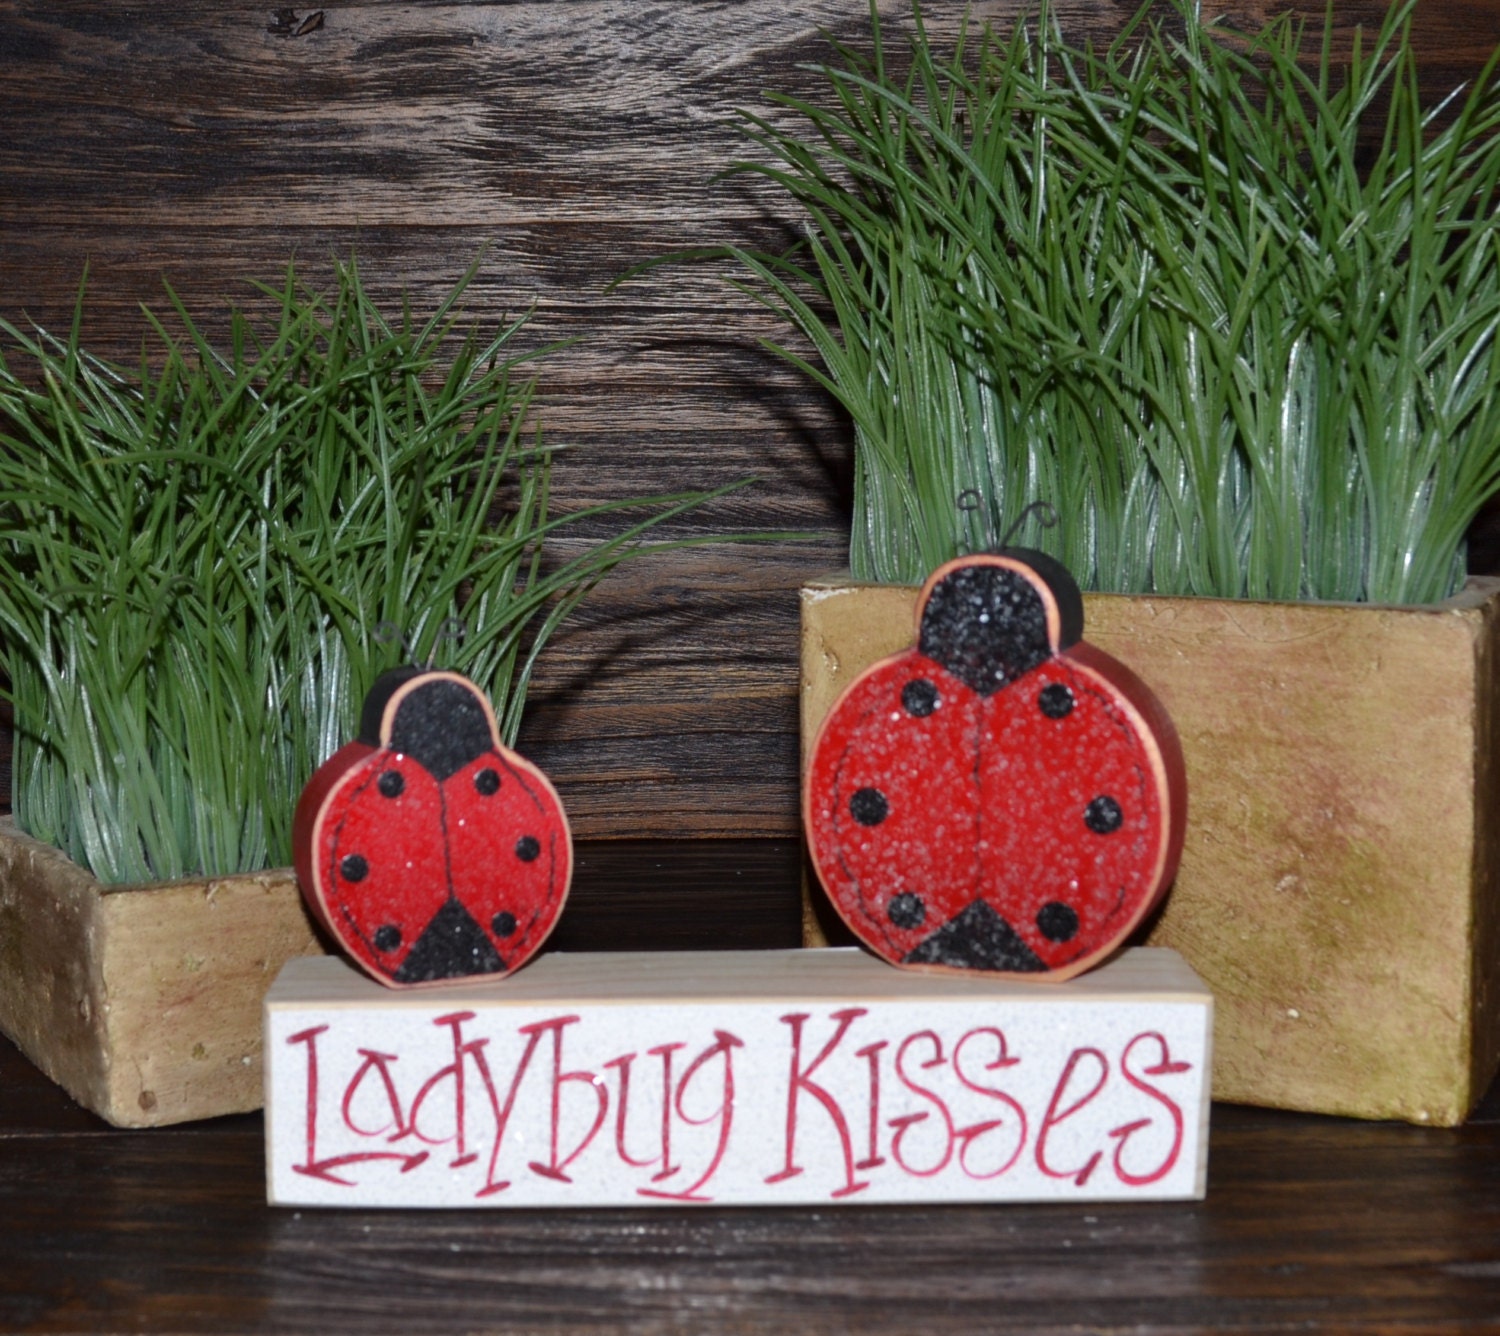 Ladybug Accent Pieces Personalized Wood Blocks by BlocksOfLove1